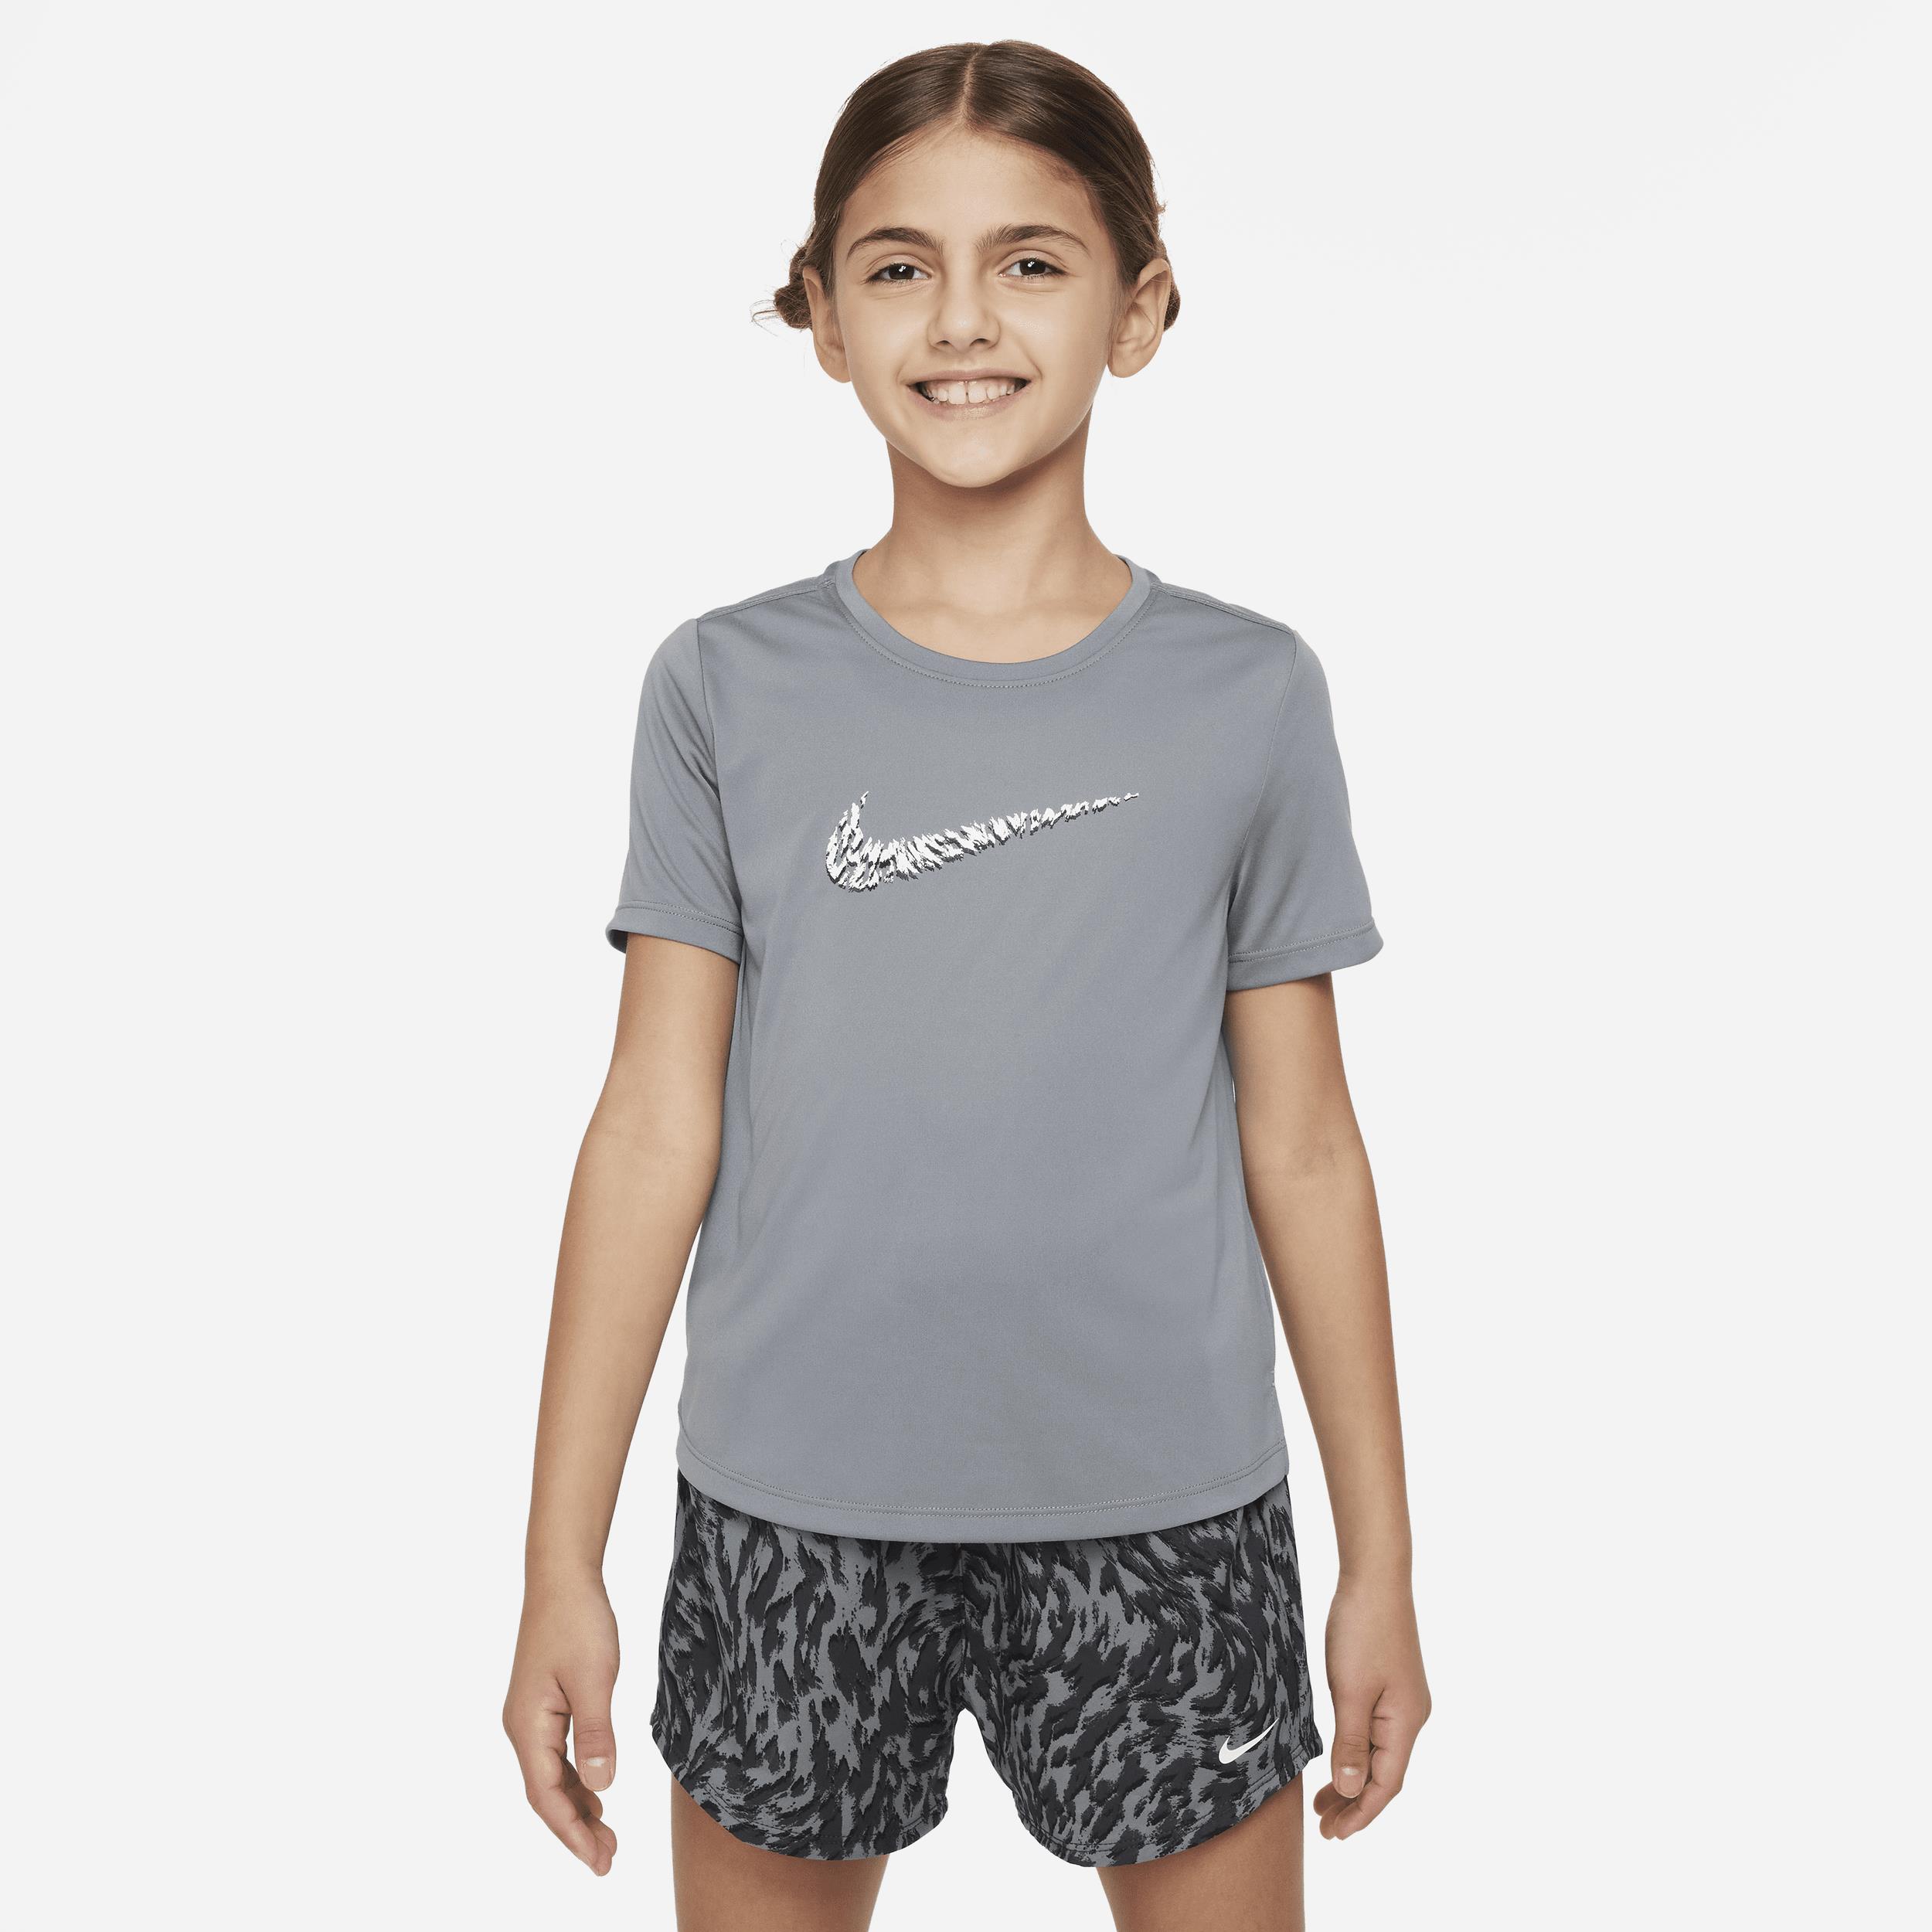 Nike One Older Kids' (Girls') Short-Sleeve Training Top - Grey - 50% Recycled Polyester